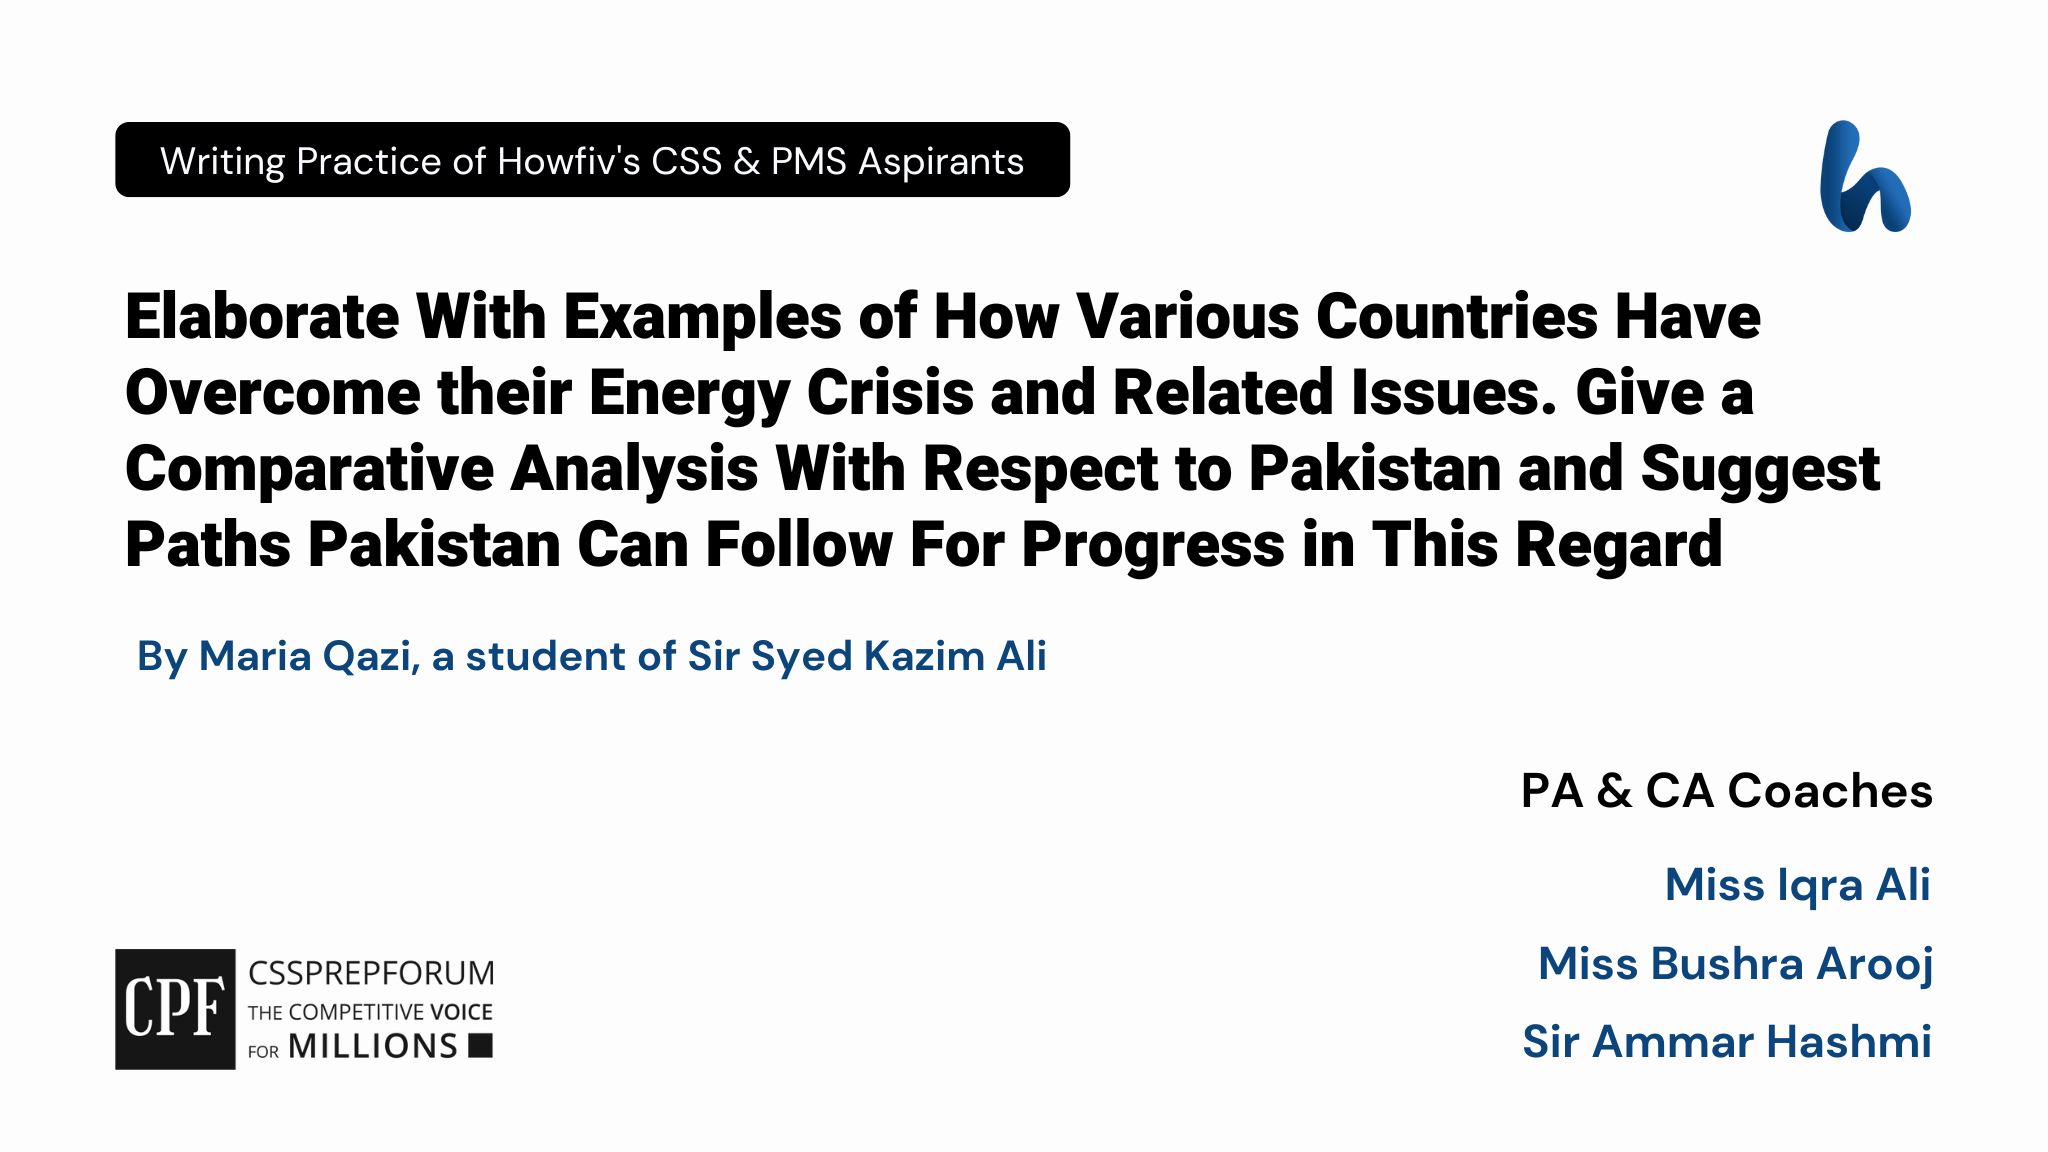 CSS Current Affairs article | Lessons for Pakistan to Overcome Energy Crisis | is written by Maria Qazi under the supervision of Sir Ammar Hashmi...